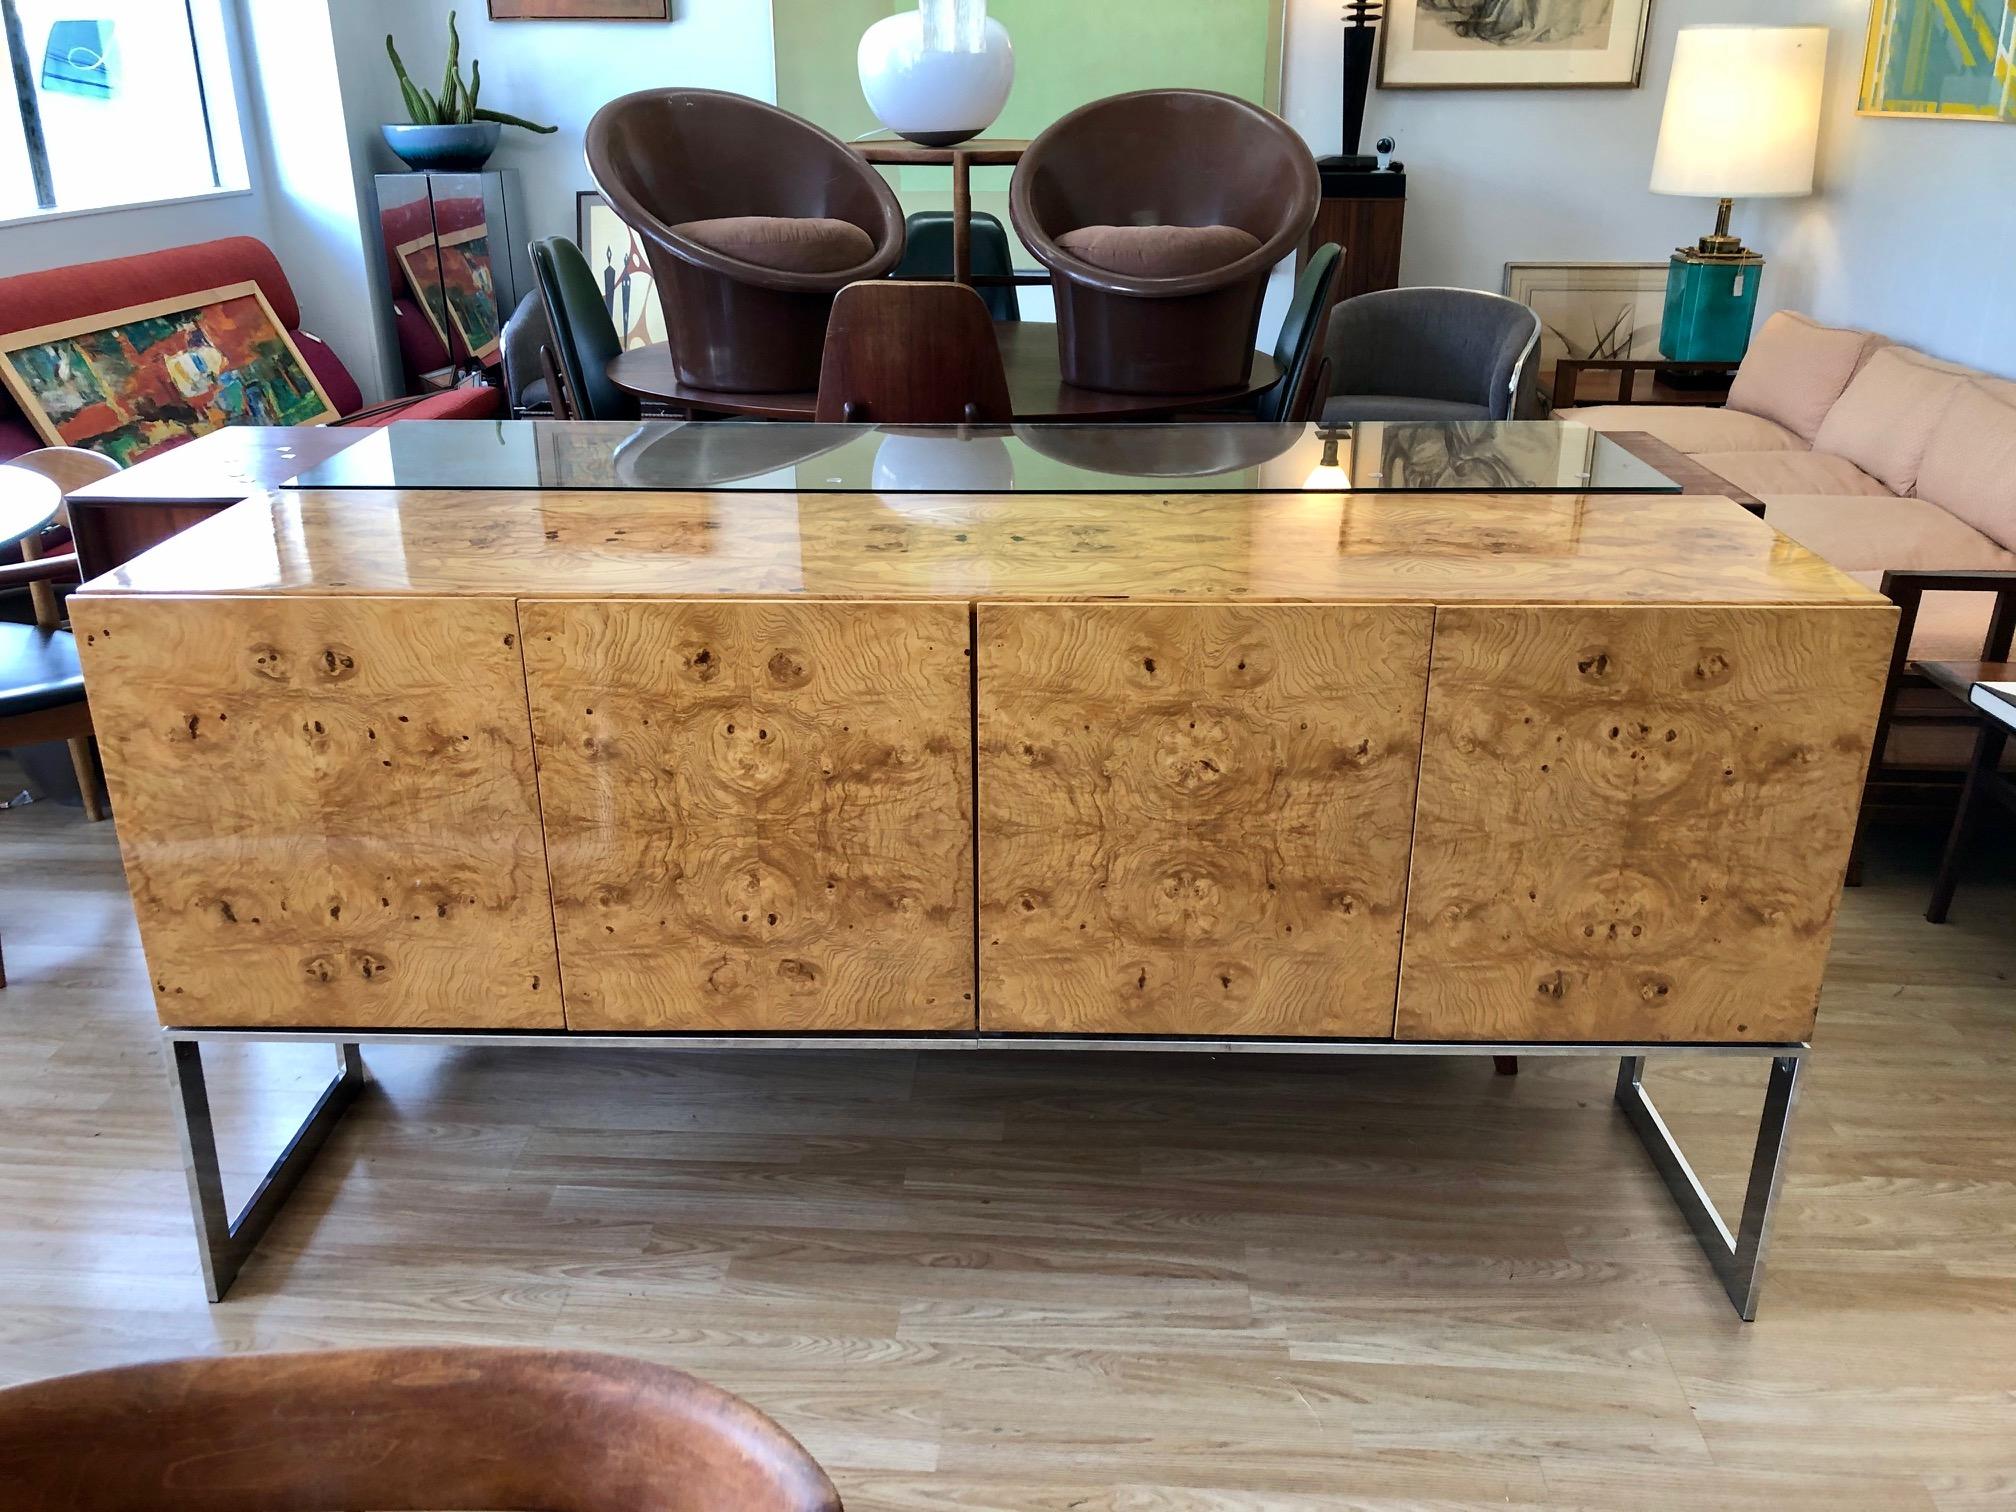 This gorgeous vintage burl wood credenza by Milo Baughman for Thayer Coggin is in overall good condition. Stunning burl wood grain. Glass top. Chrome base. Interior shelving and drawers. Eye-catching statement piece,
circa 1970s.